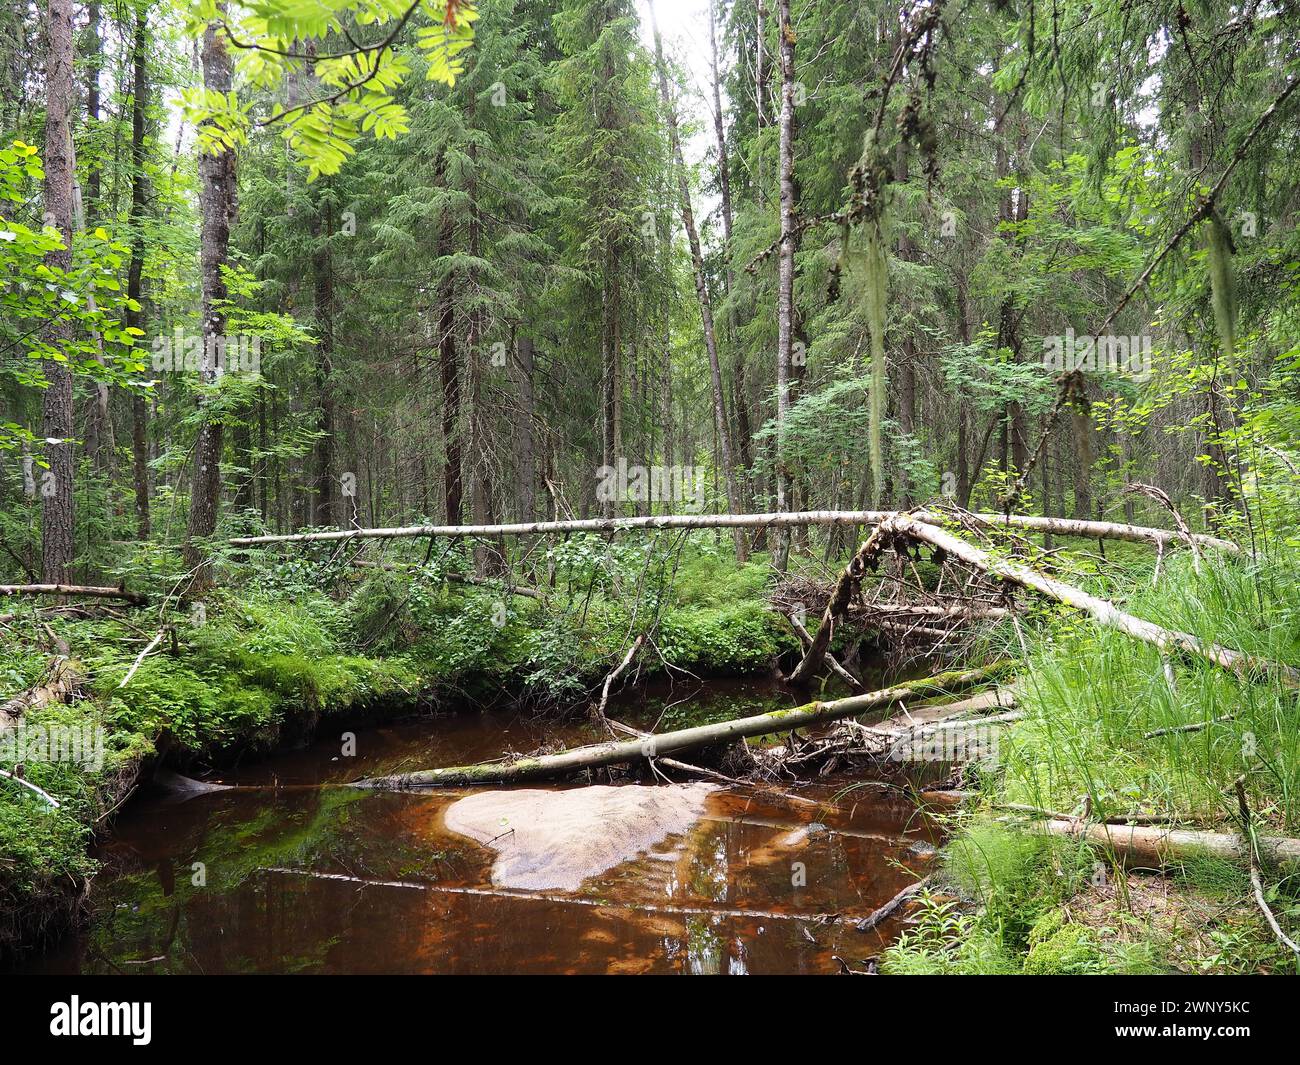 Taiga biome dominated by coniferous forests. Picea spruce, coniferous evergreen trees in the Pine family Pinaceae. Russia, Karelia. Forest river Stock Photo